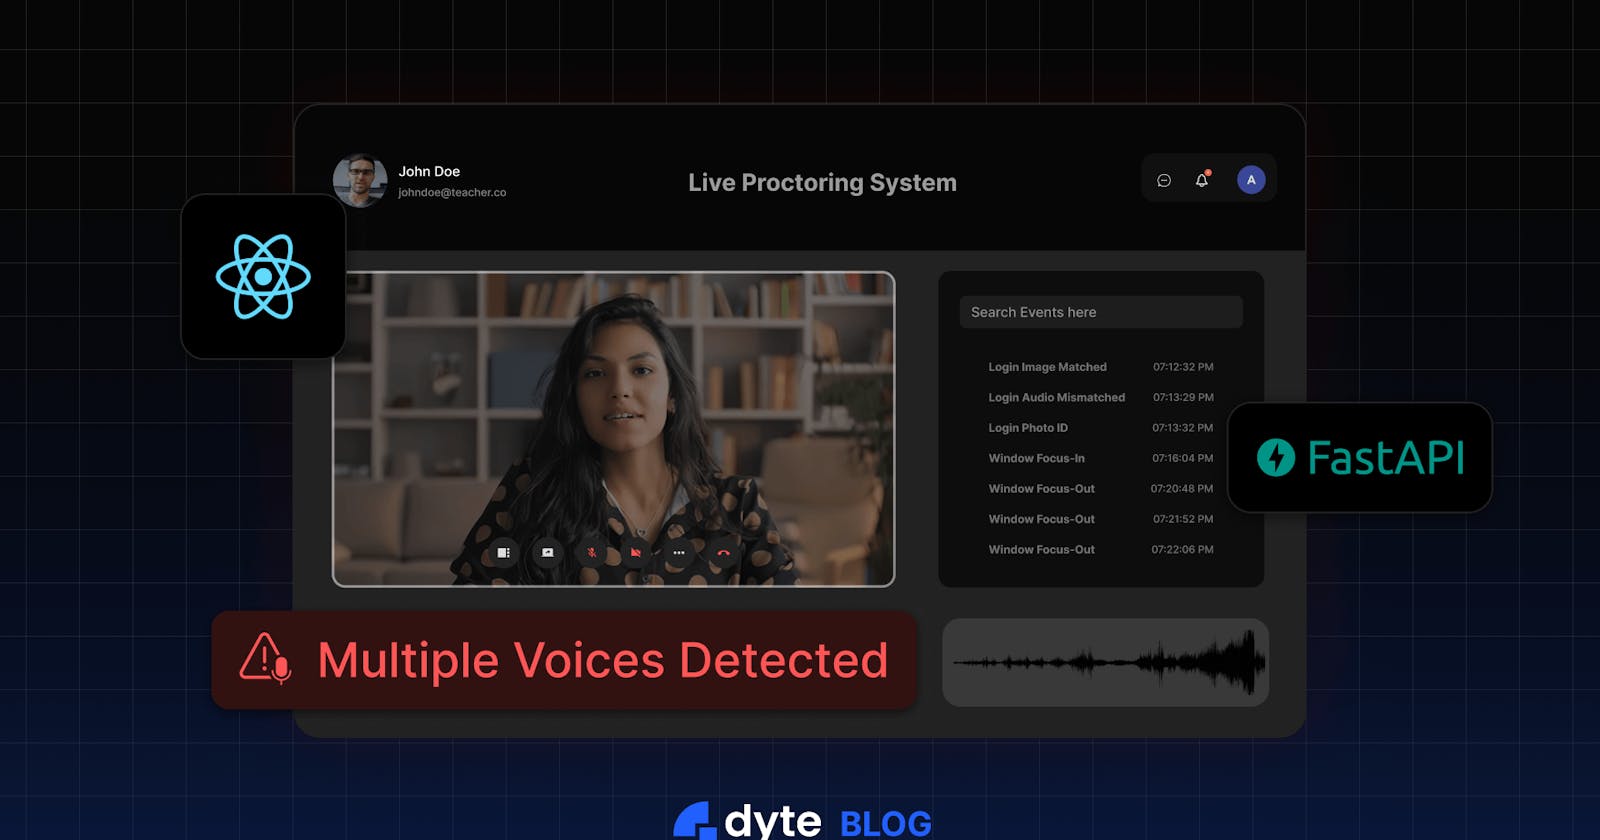 Building a Live Proctoring System to Detect Multiple Speakers